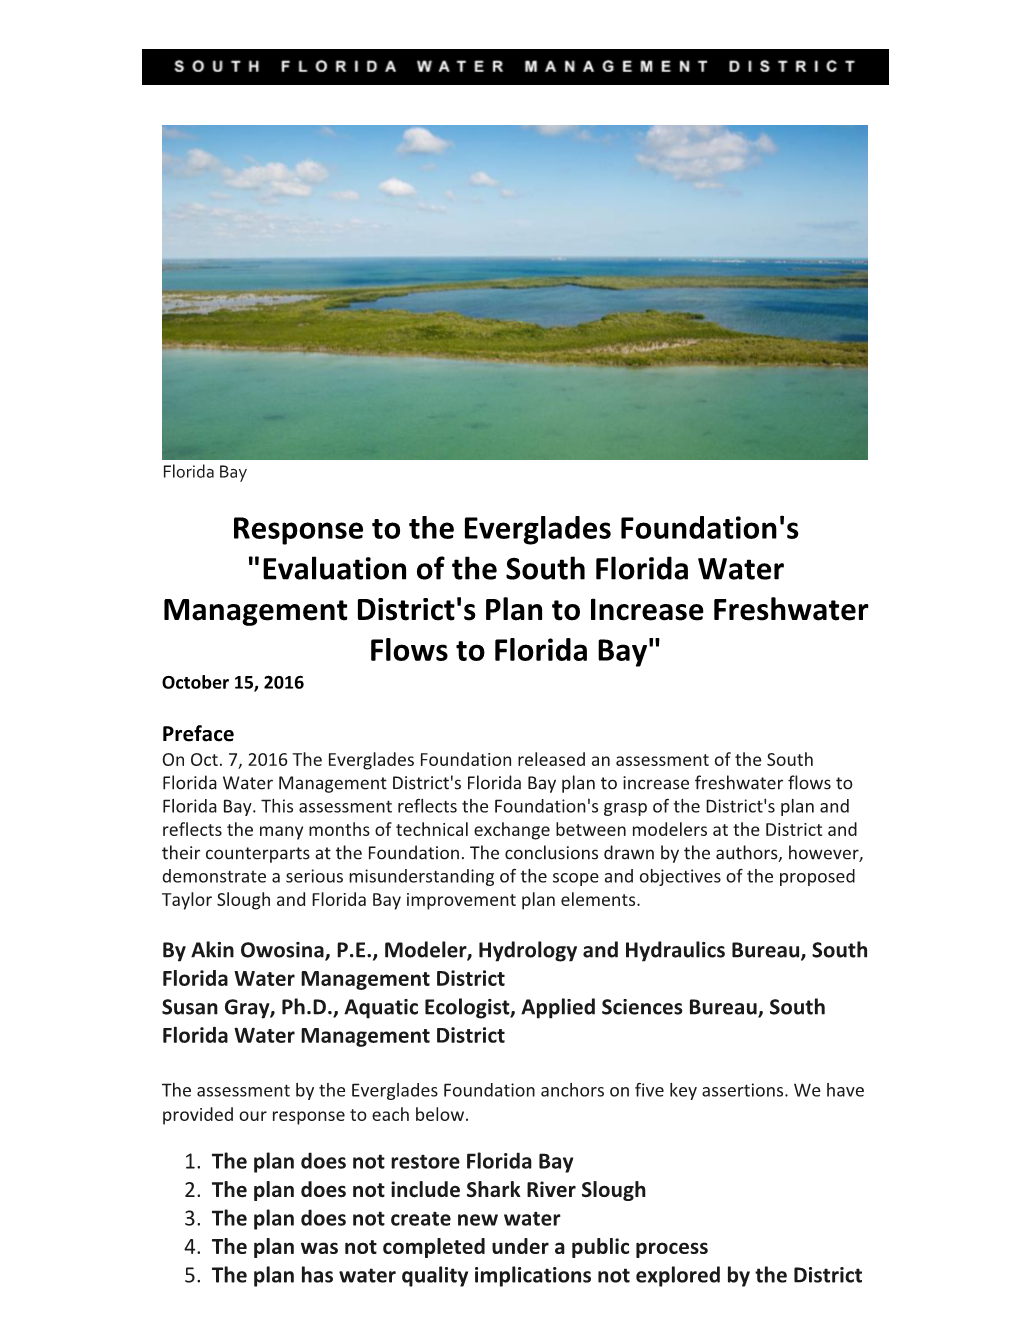 Response to the Everglades Foundation's "Evaluation of The